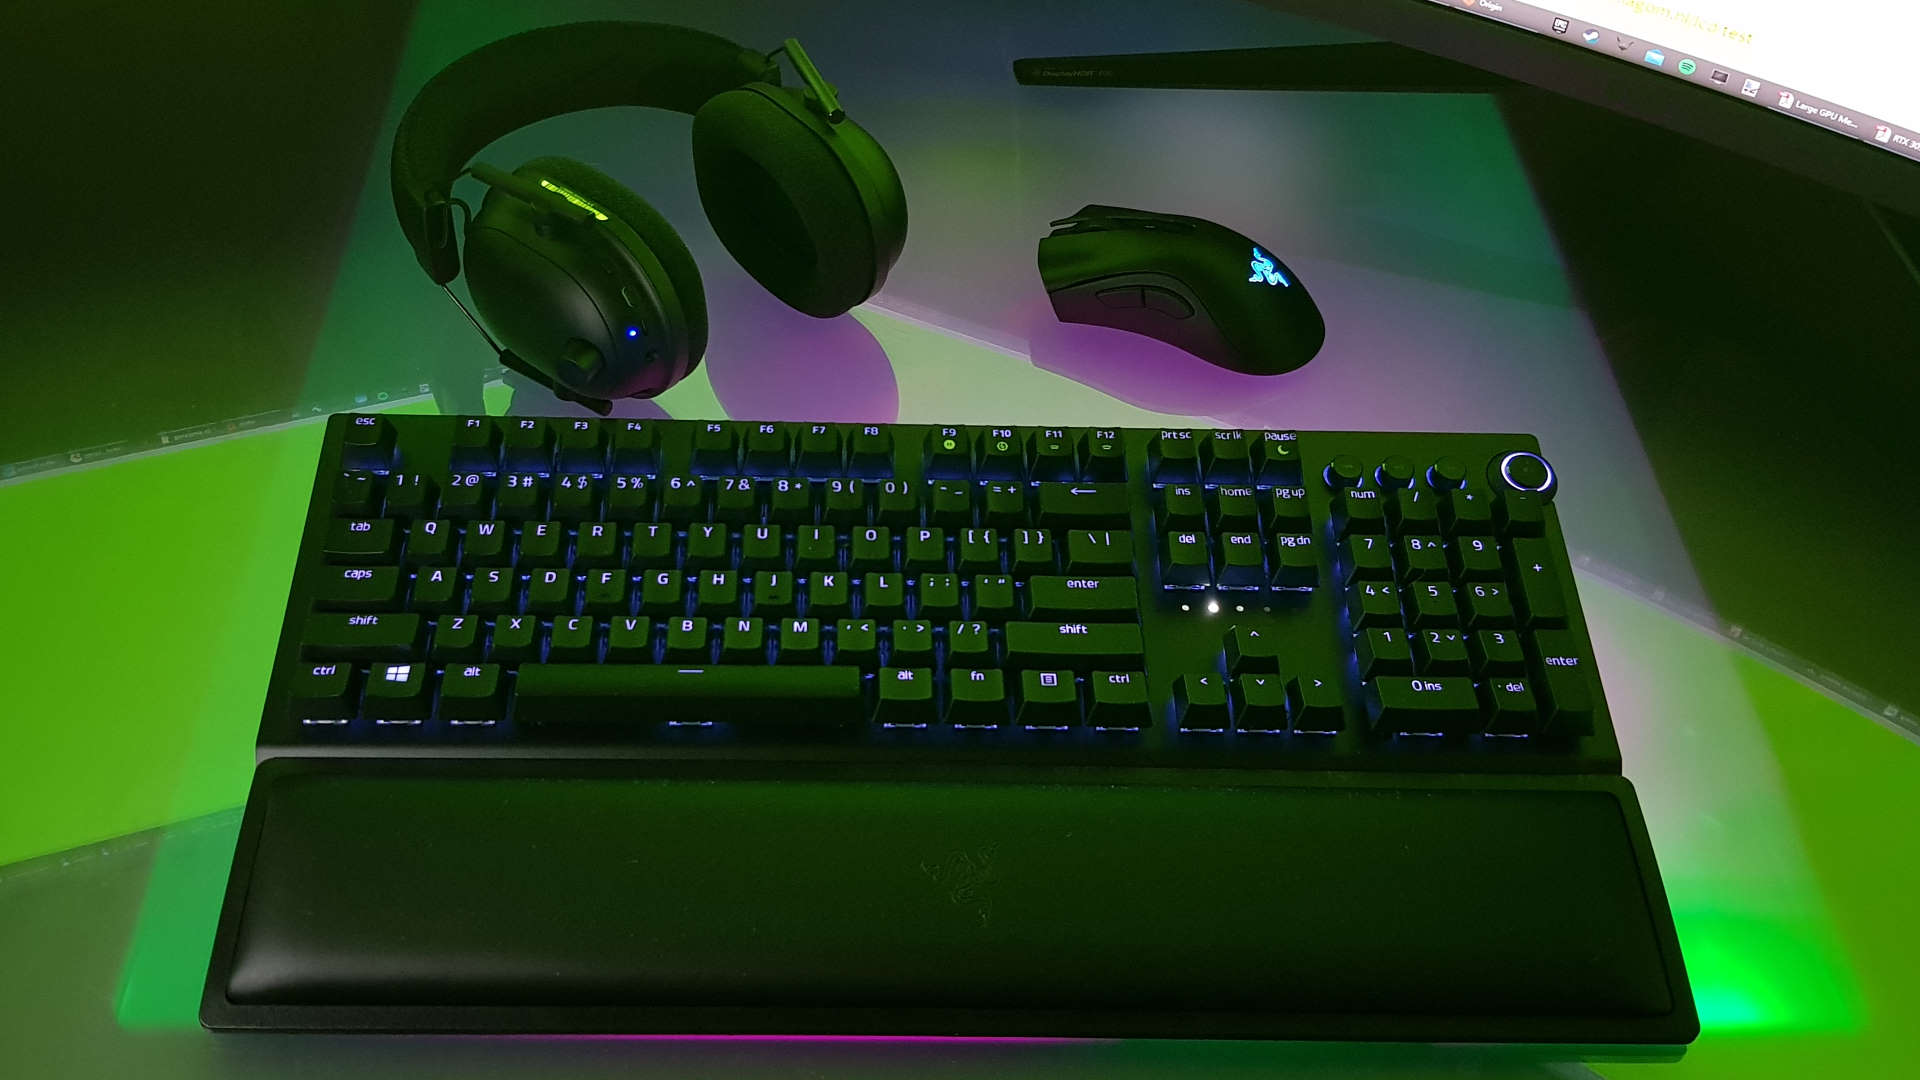  The Razer BlackWidow V3 Pro is its first wireless gaming keyboard. Anyone else surprised by that? 